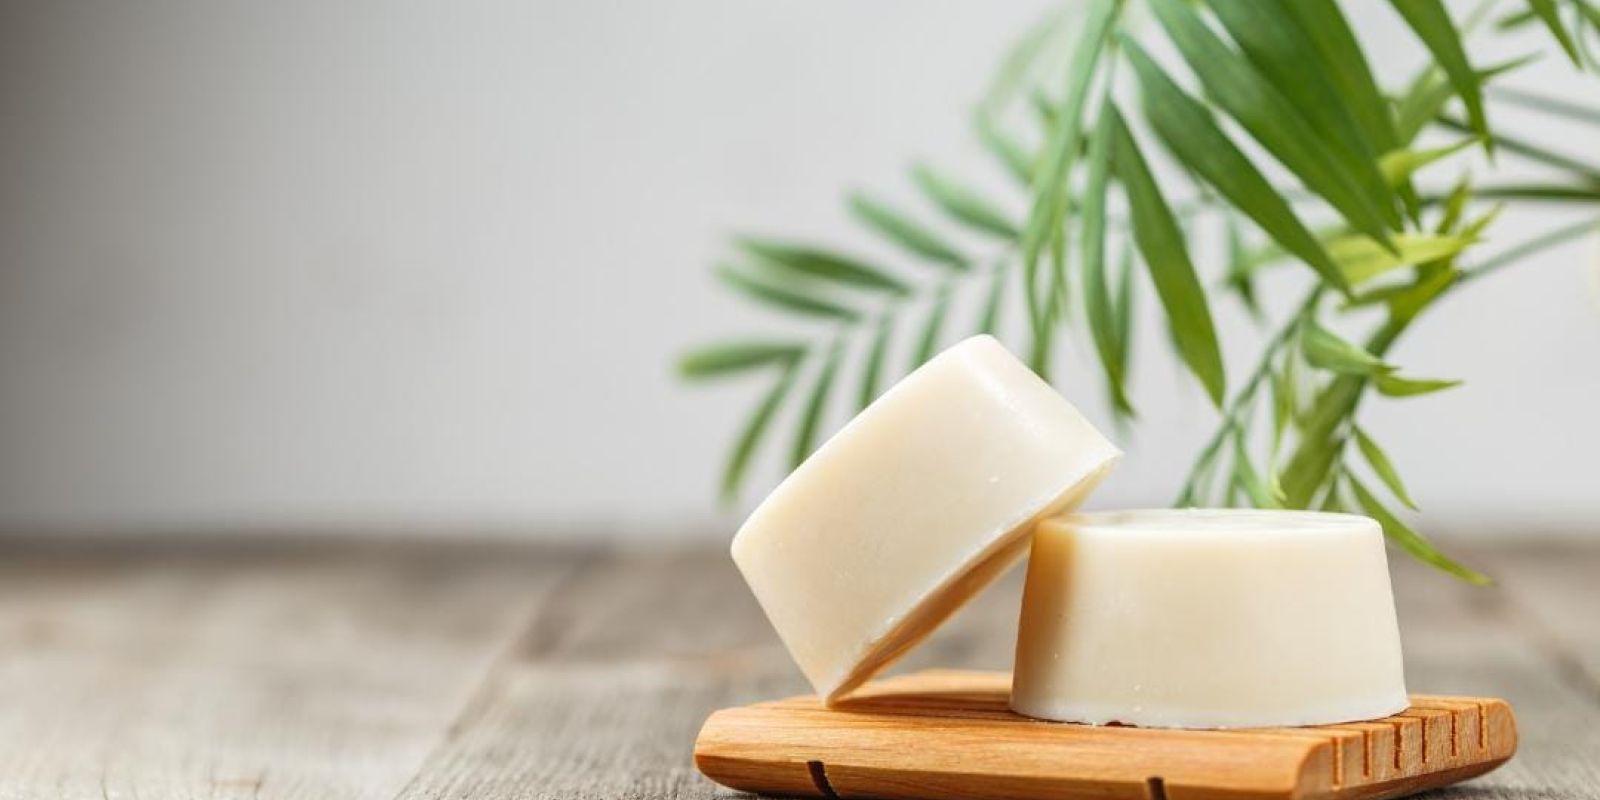 Shampoo Bars for Sensitive Scalps: The Ultimate Guide to Choosing the Right One admin ajax.php?action=kernel&p=image&src=%7B%22file%22%3A%22wp content%2Fuploads%2F2023%2F04%2FWhatsApp Image 2023 04 15 at 14.54.59